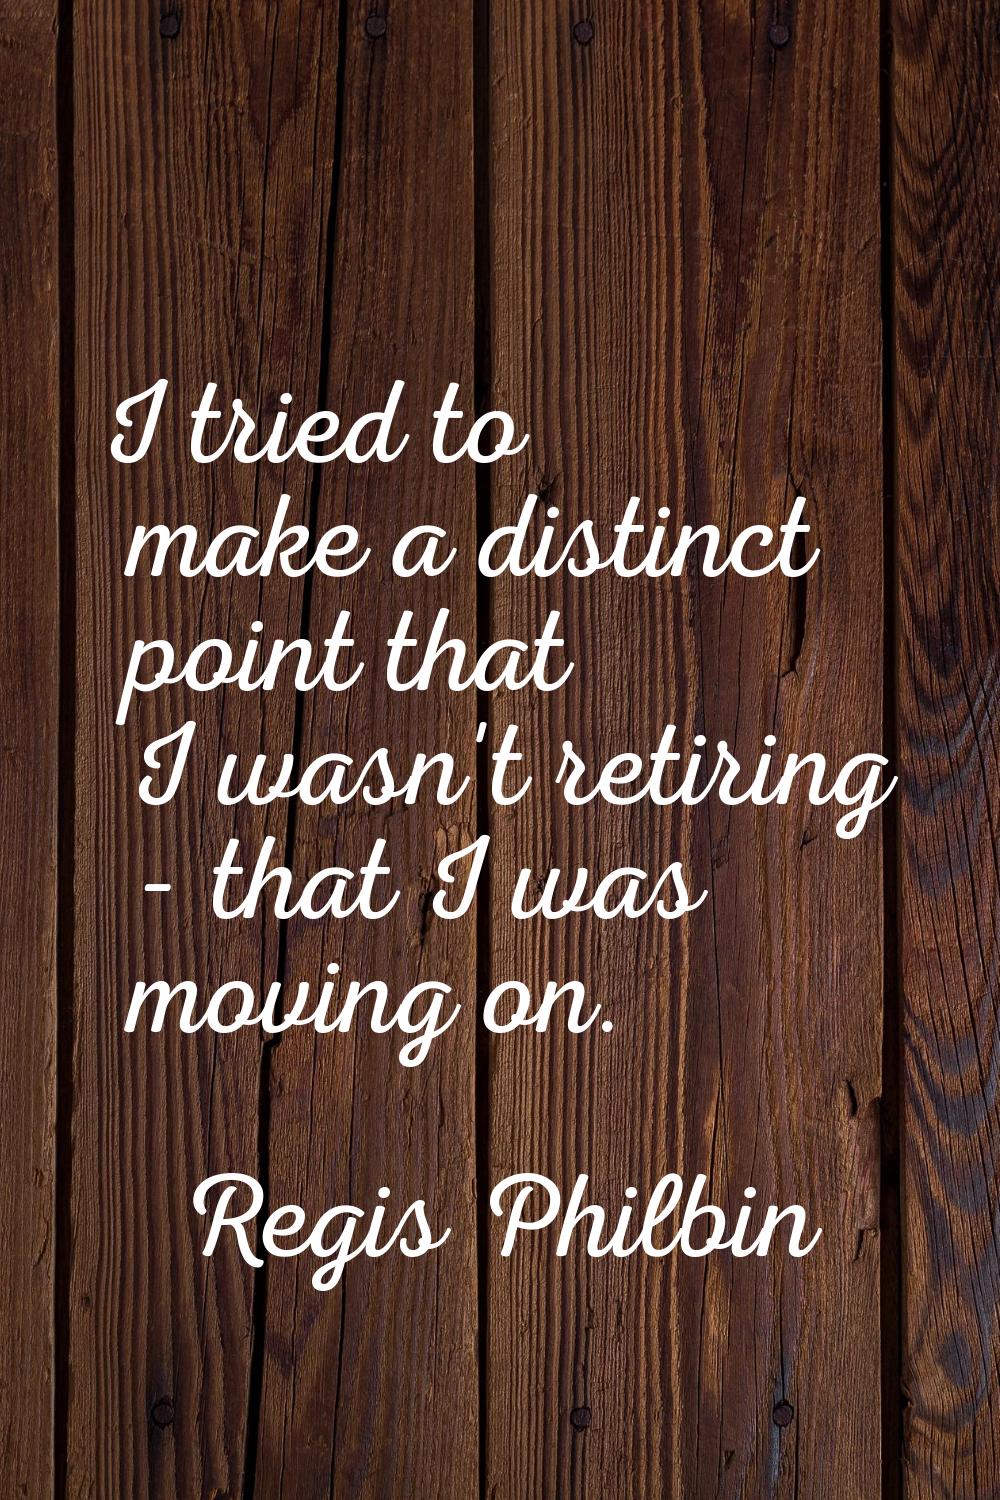 I tried to make a distinct point that I wasn't retiring - that I was moving on.